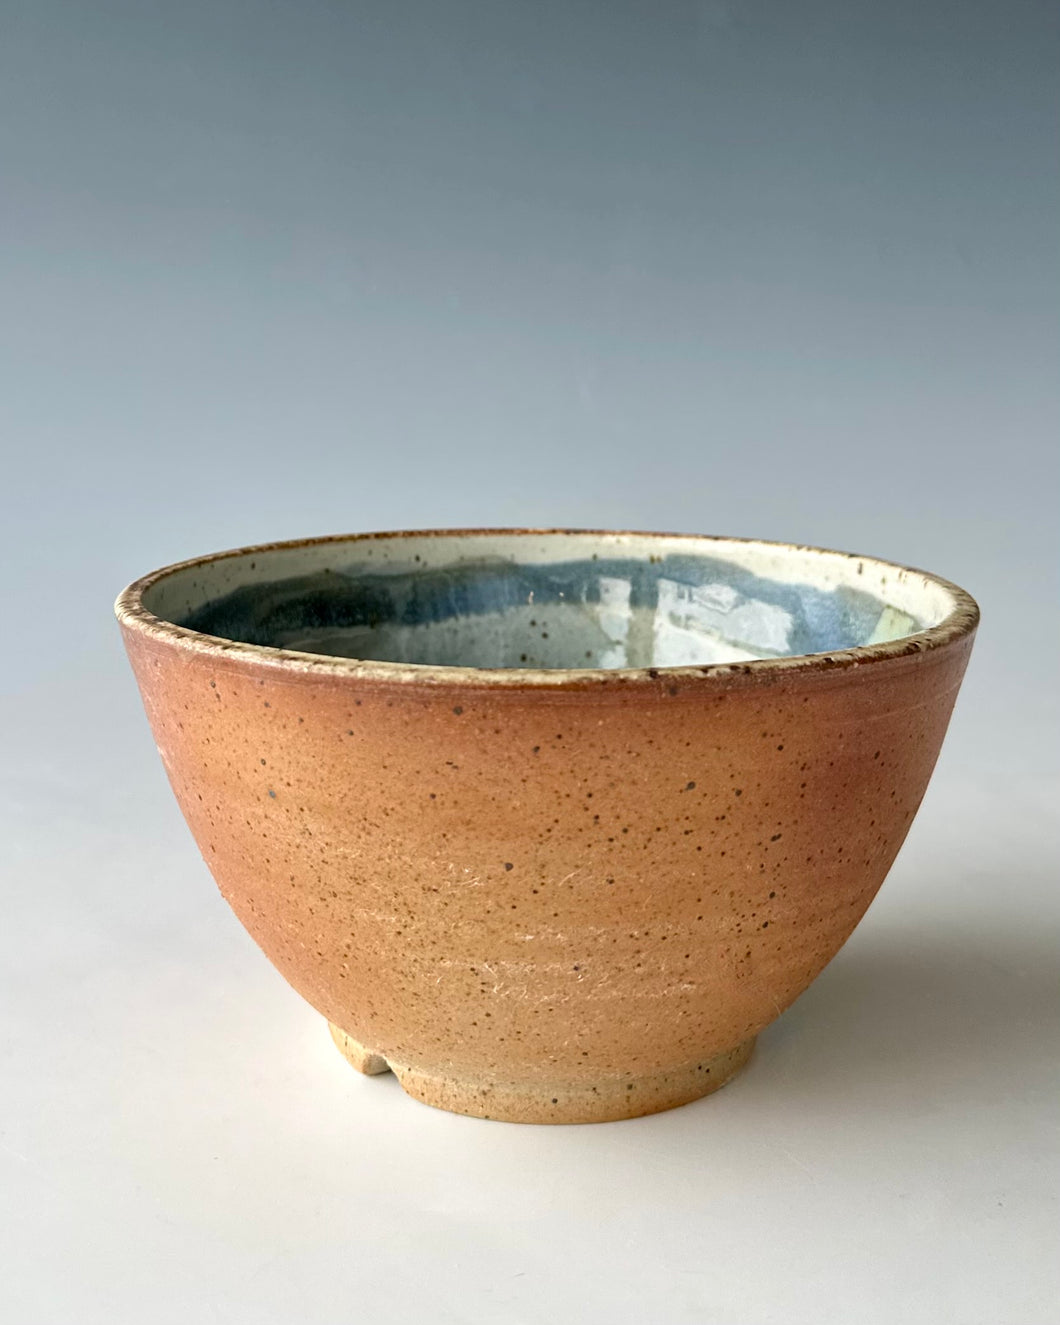 Ready to Mix Bowl by KJ MacAlister